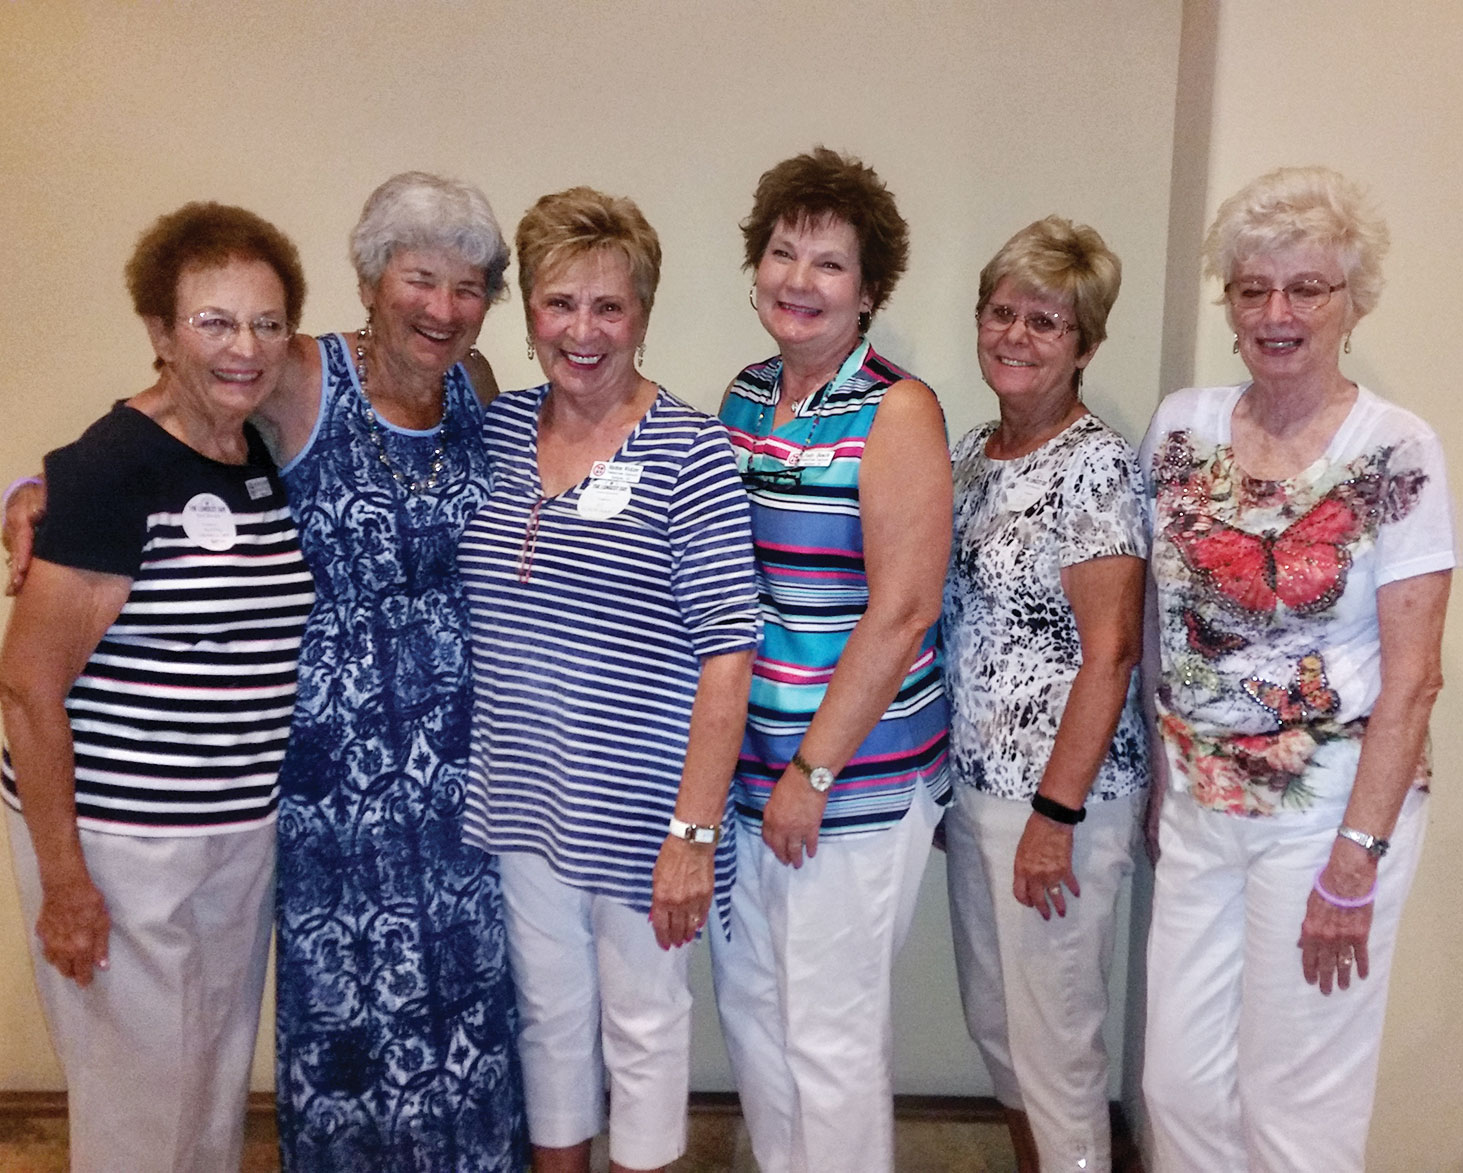 Committee that helped make The Longest Day Event a success, left to right: JoAnn Enyeart, Mary Lou Cralle, Marlene Wickizer, Judy Bosch, Judy Brown and Sue Woodard